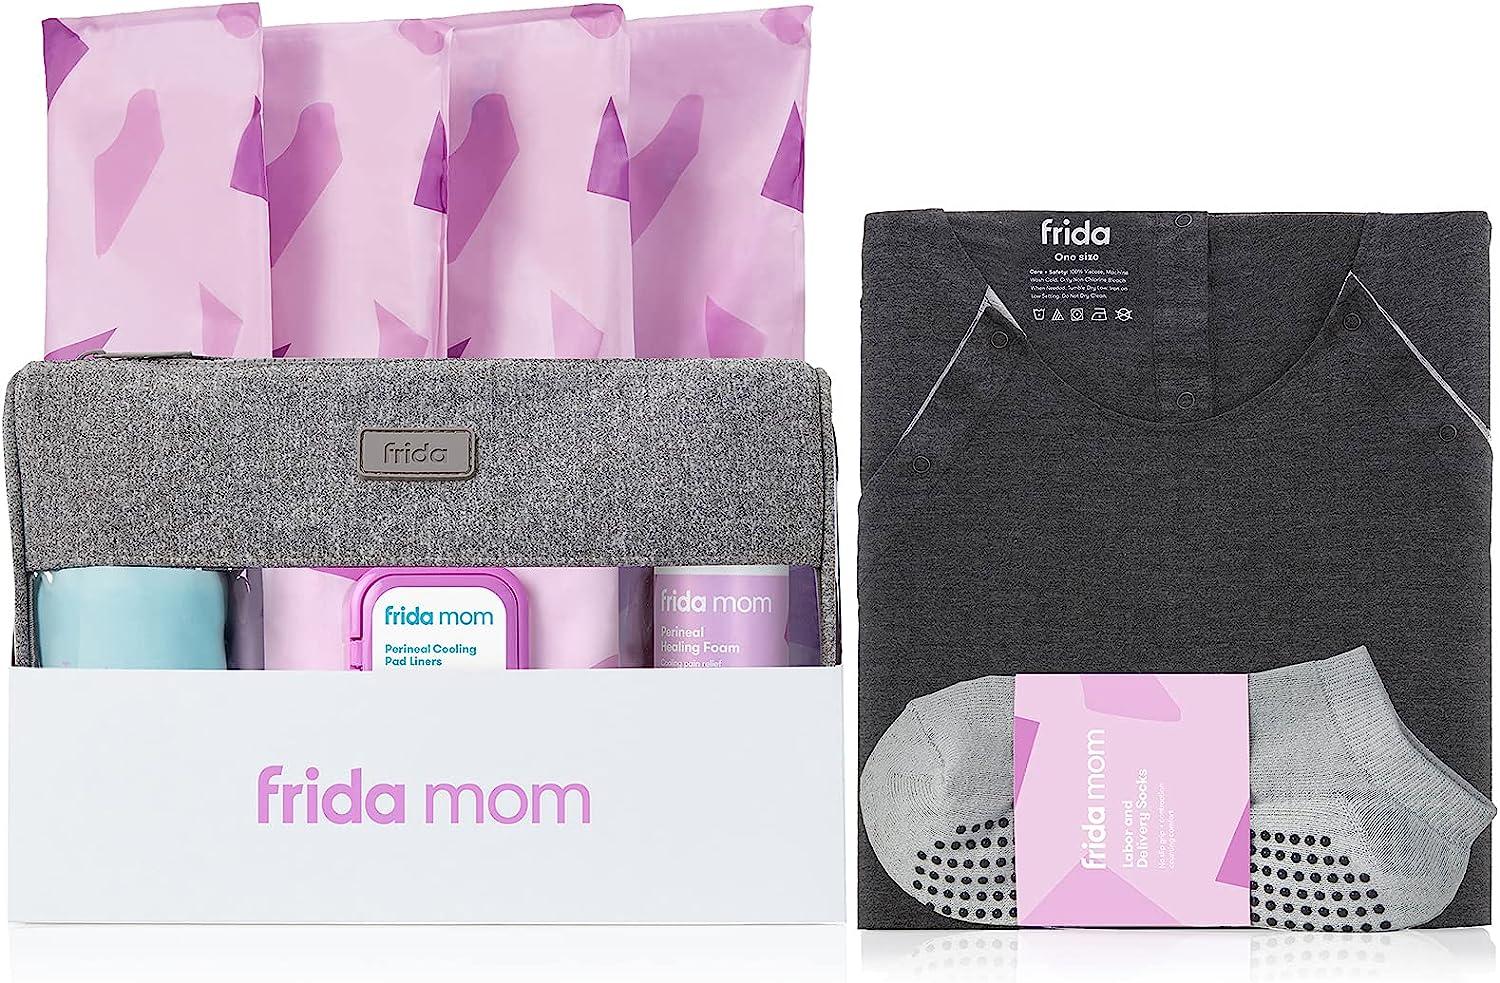 Frida Mom Postpartum Recovery Essentials Kit 36 Count (Pack of 1)